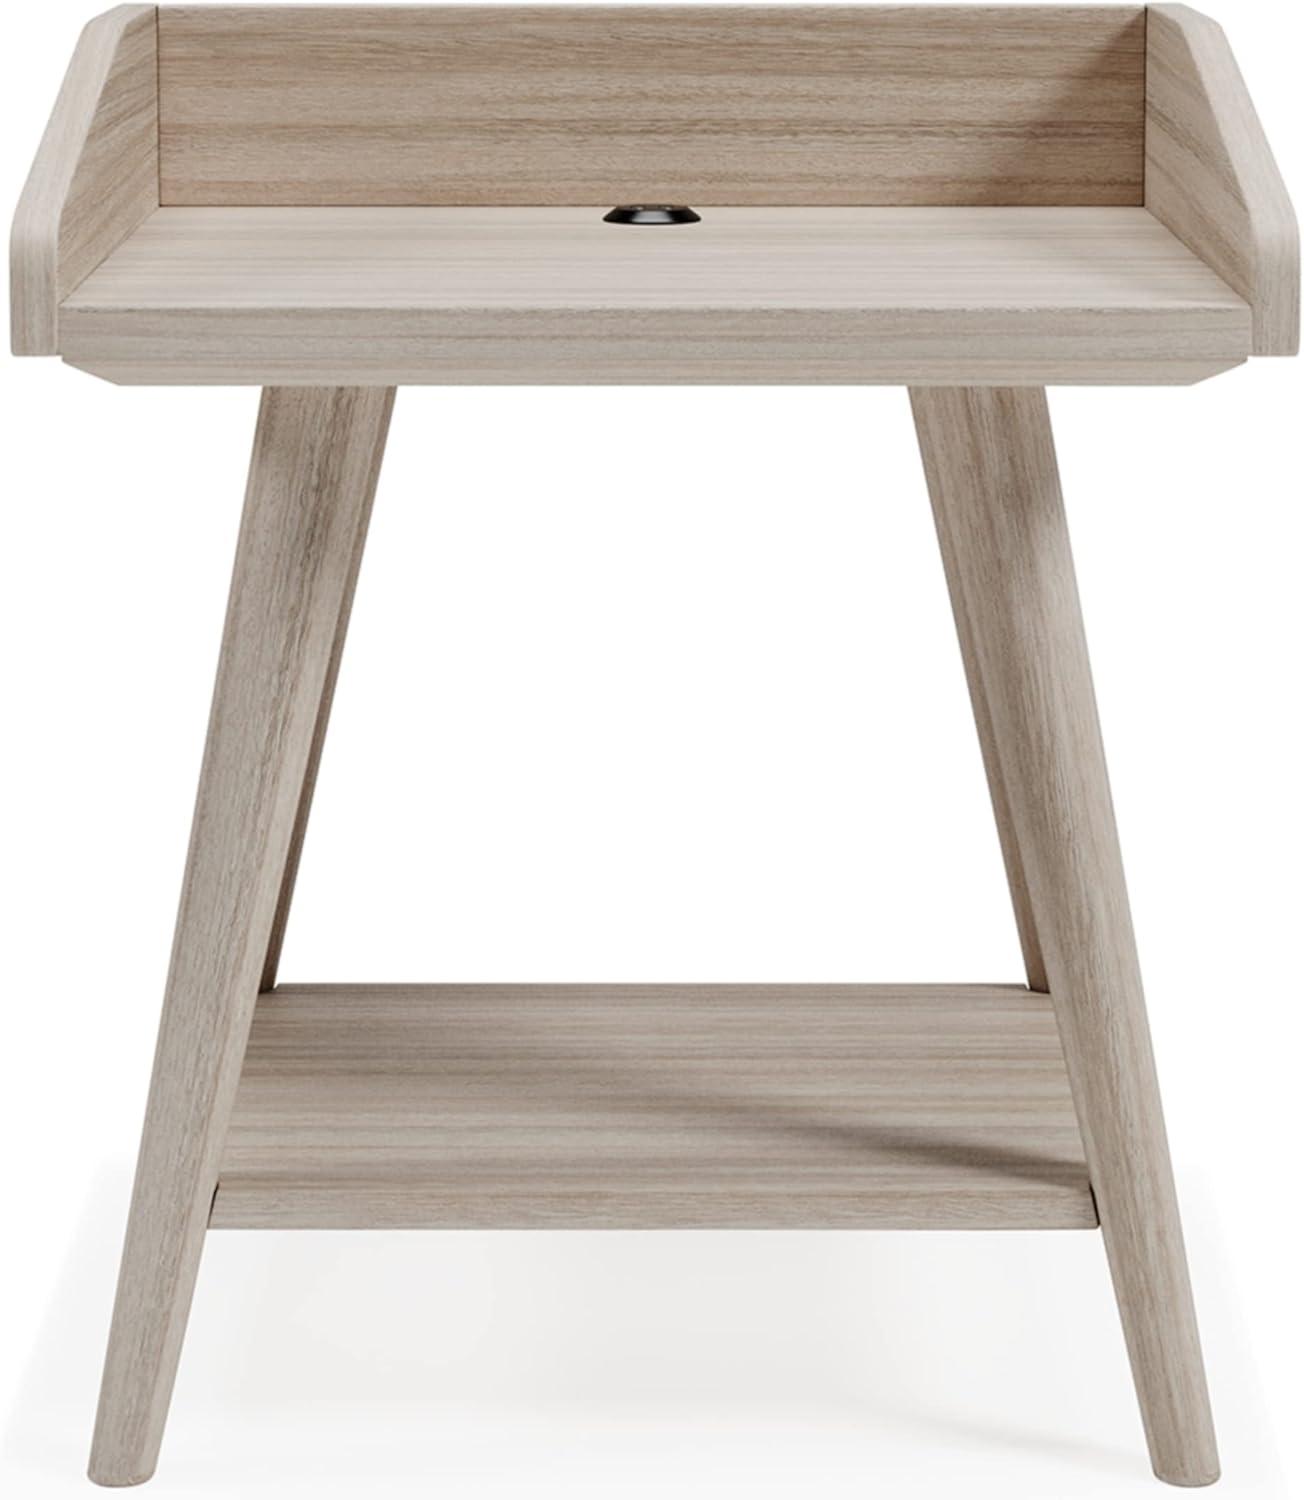 Blariden Transitional Beige Wood Accent Table with USB Chargers